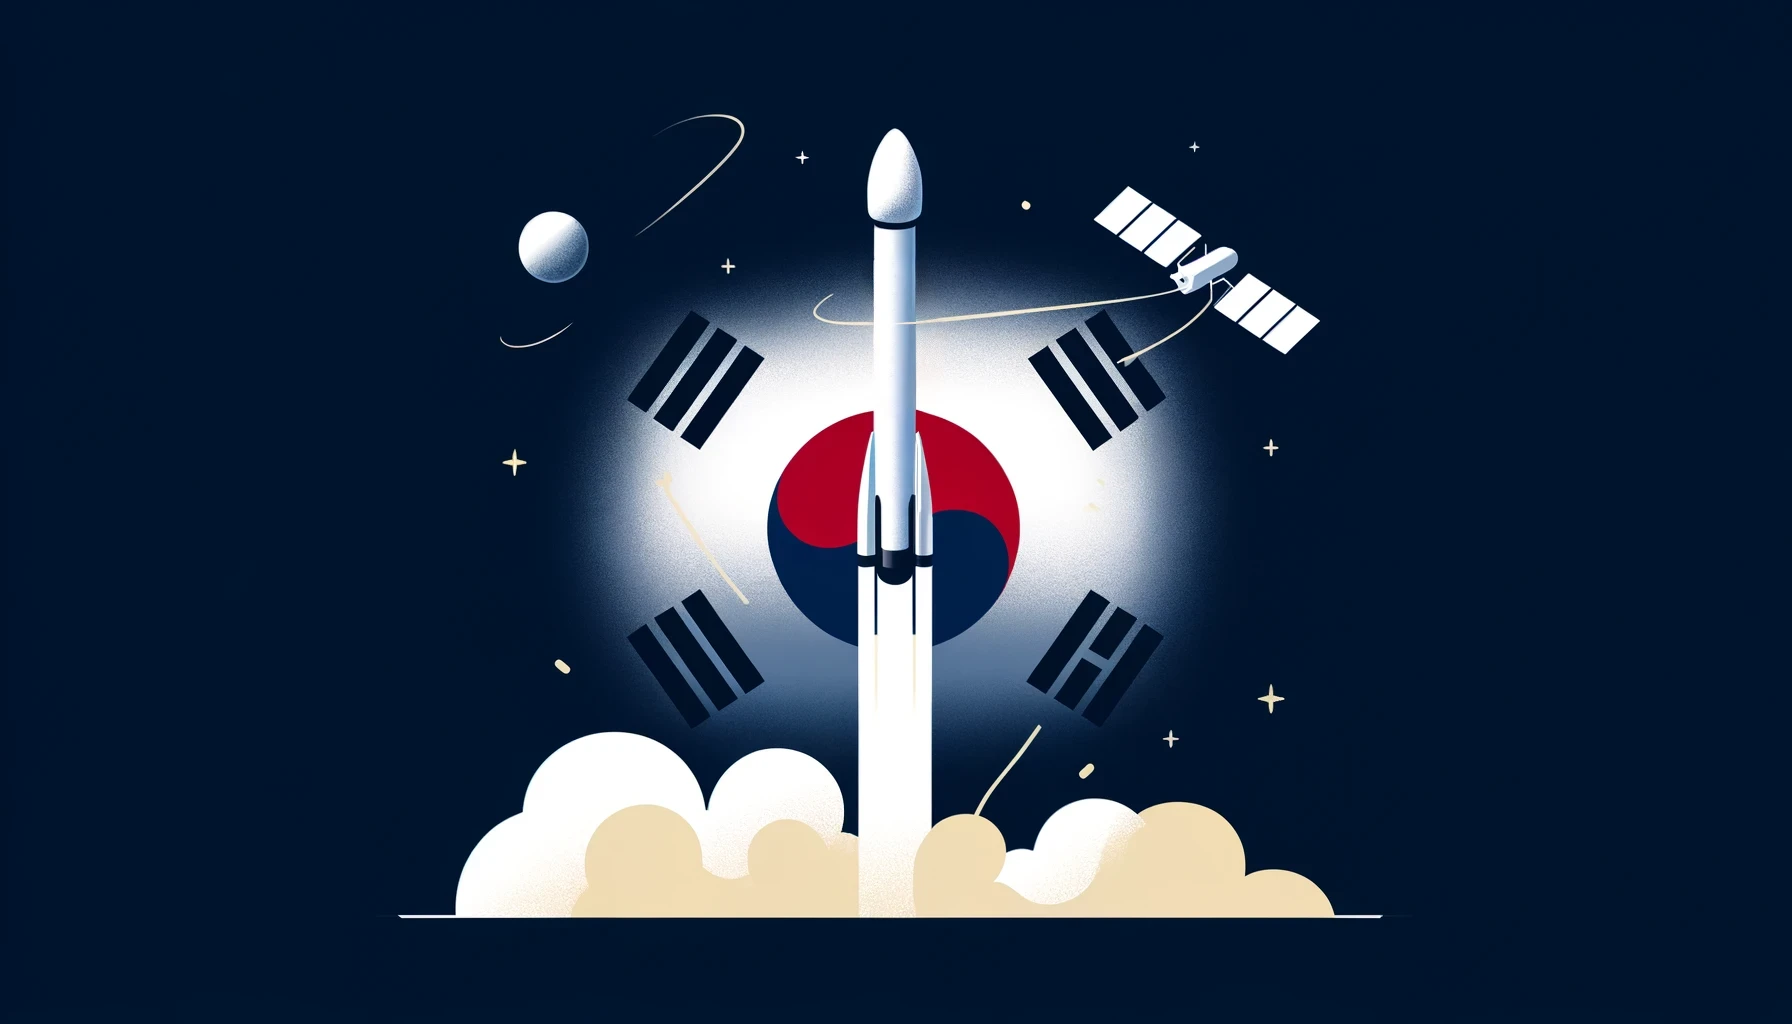 SpaceX rocket launch and subtly incorporate elements representing South Korea, including a second spy satellite, in a clean, modern design suitable for conveying the theme of space exploration and international rivalry.